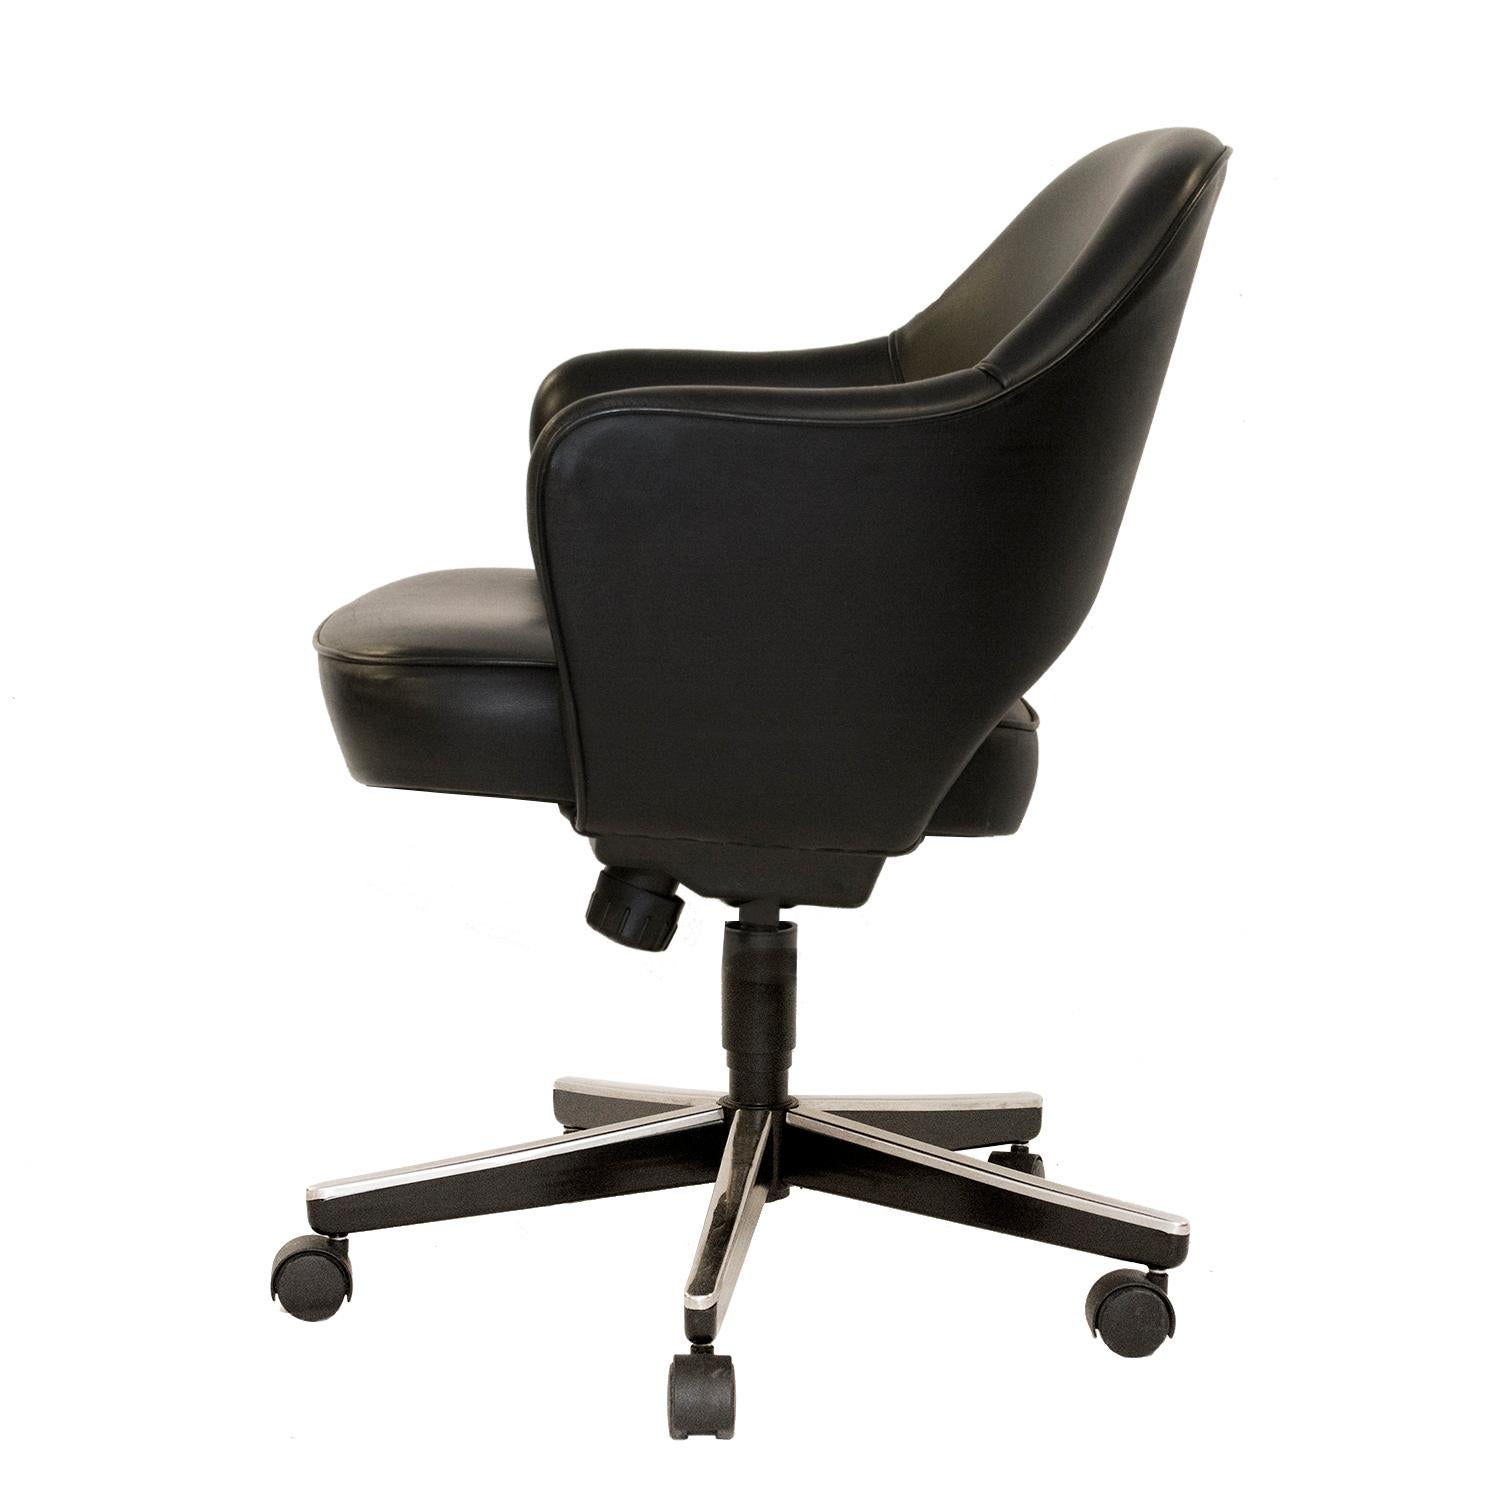 Modern Saarinen Executive Arm Chair in Original Black Leather, Contemporary Swivel Base For Sale